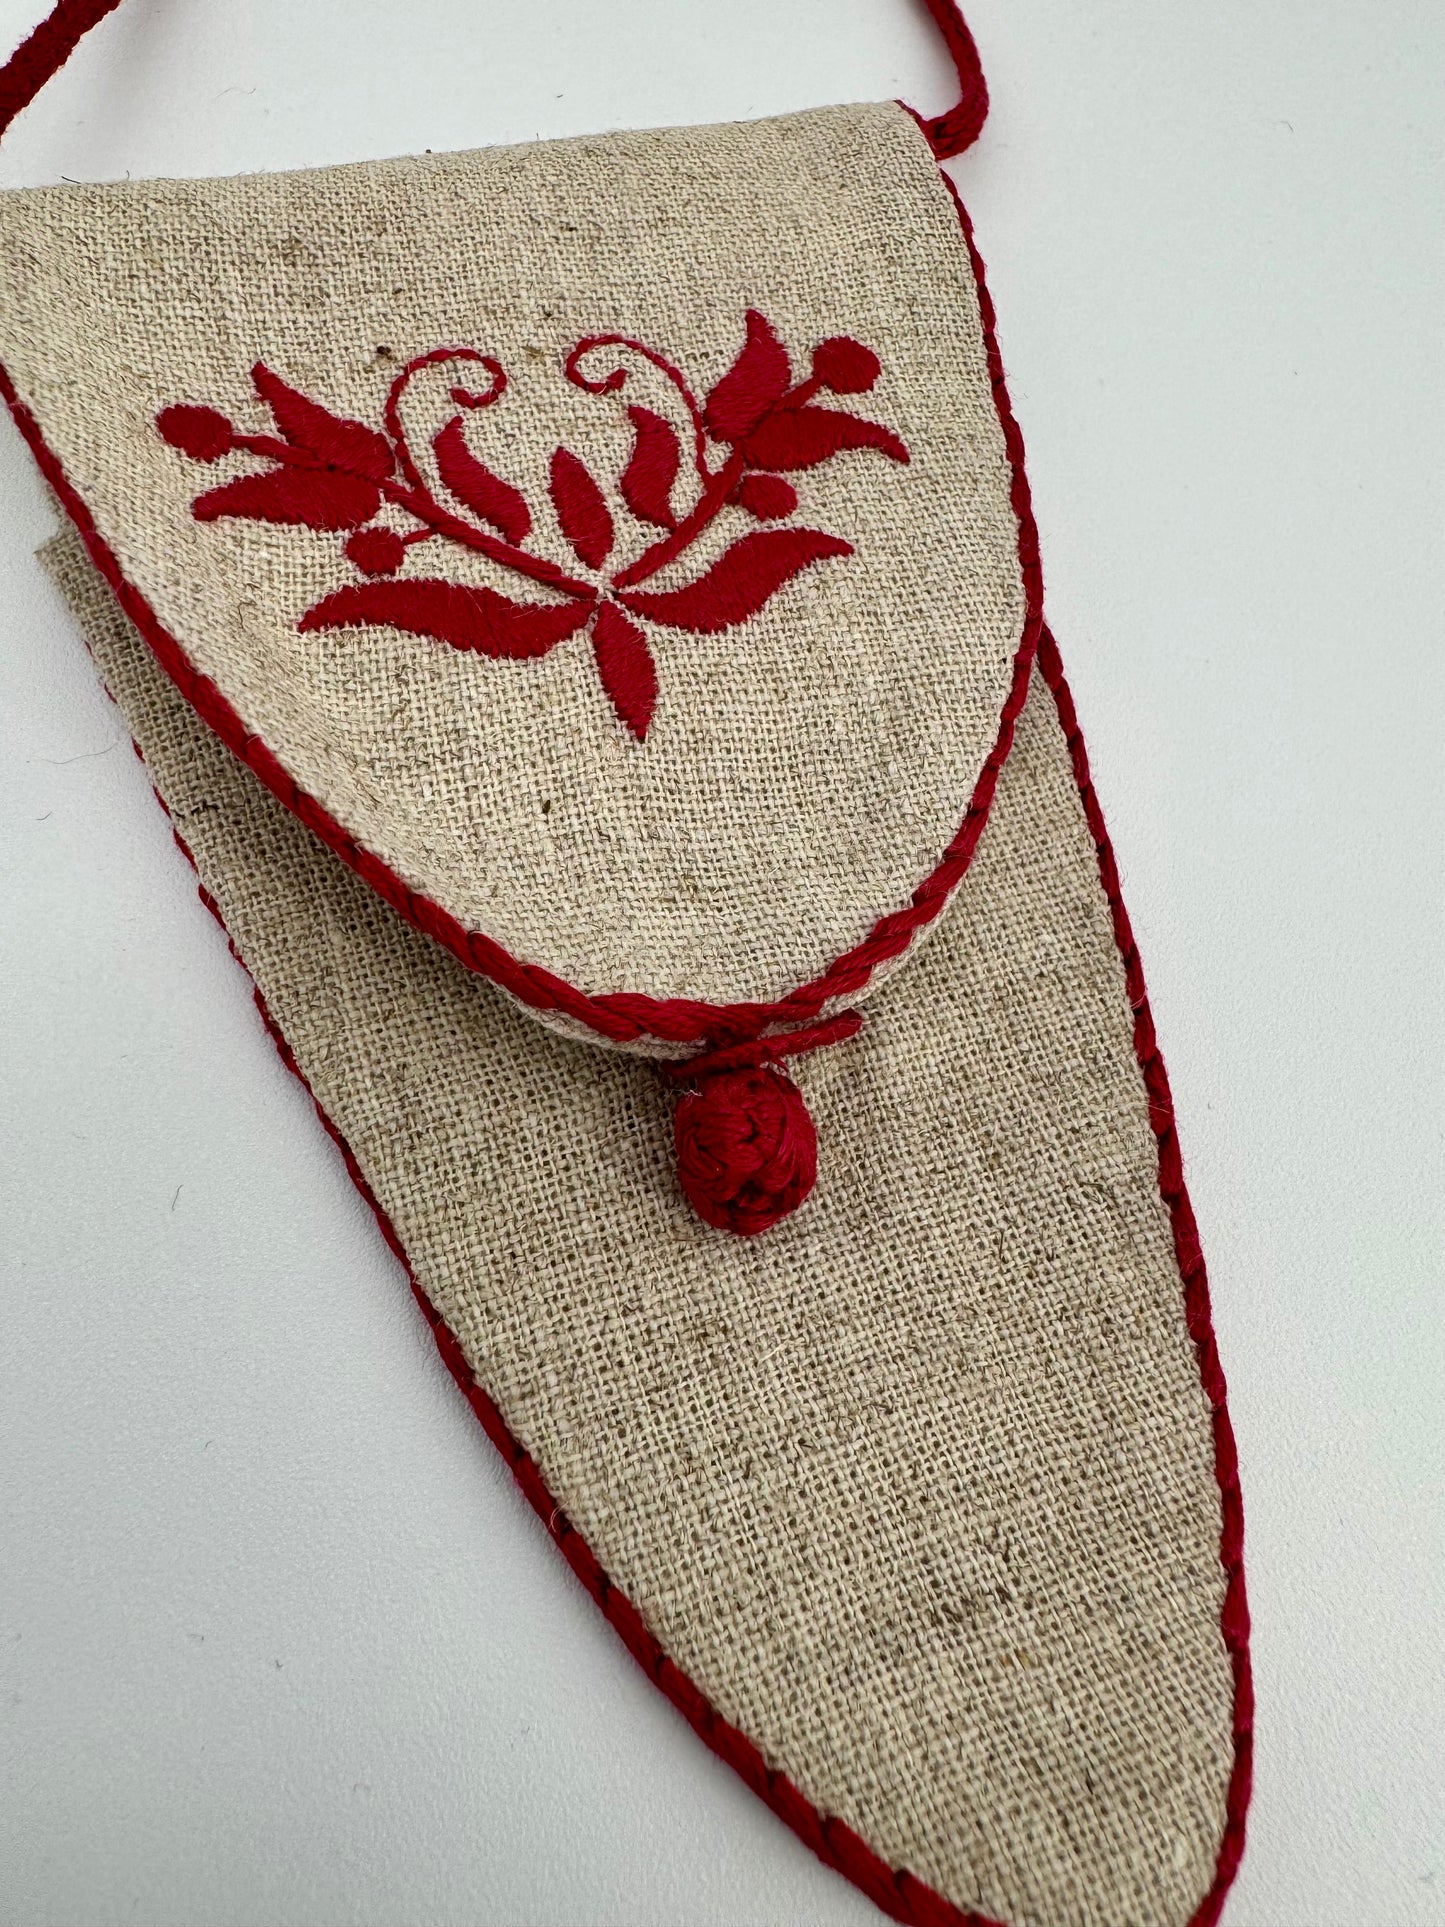 Hand Embroidered Scissor Case and Needle Book